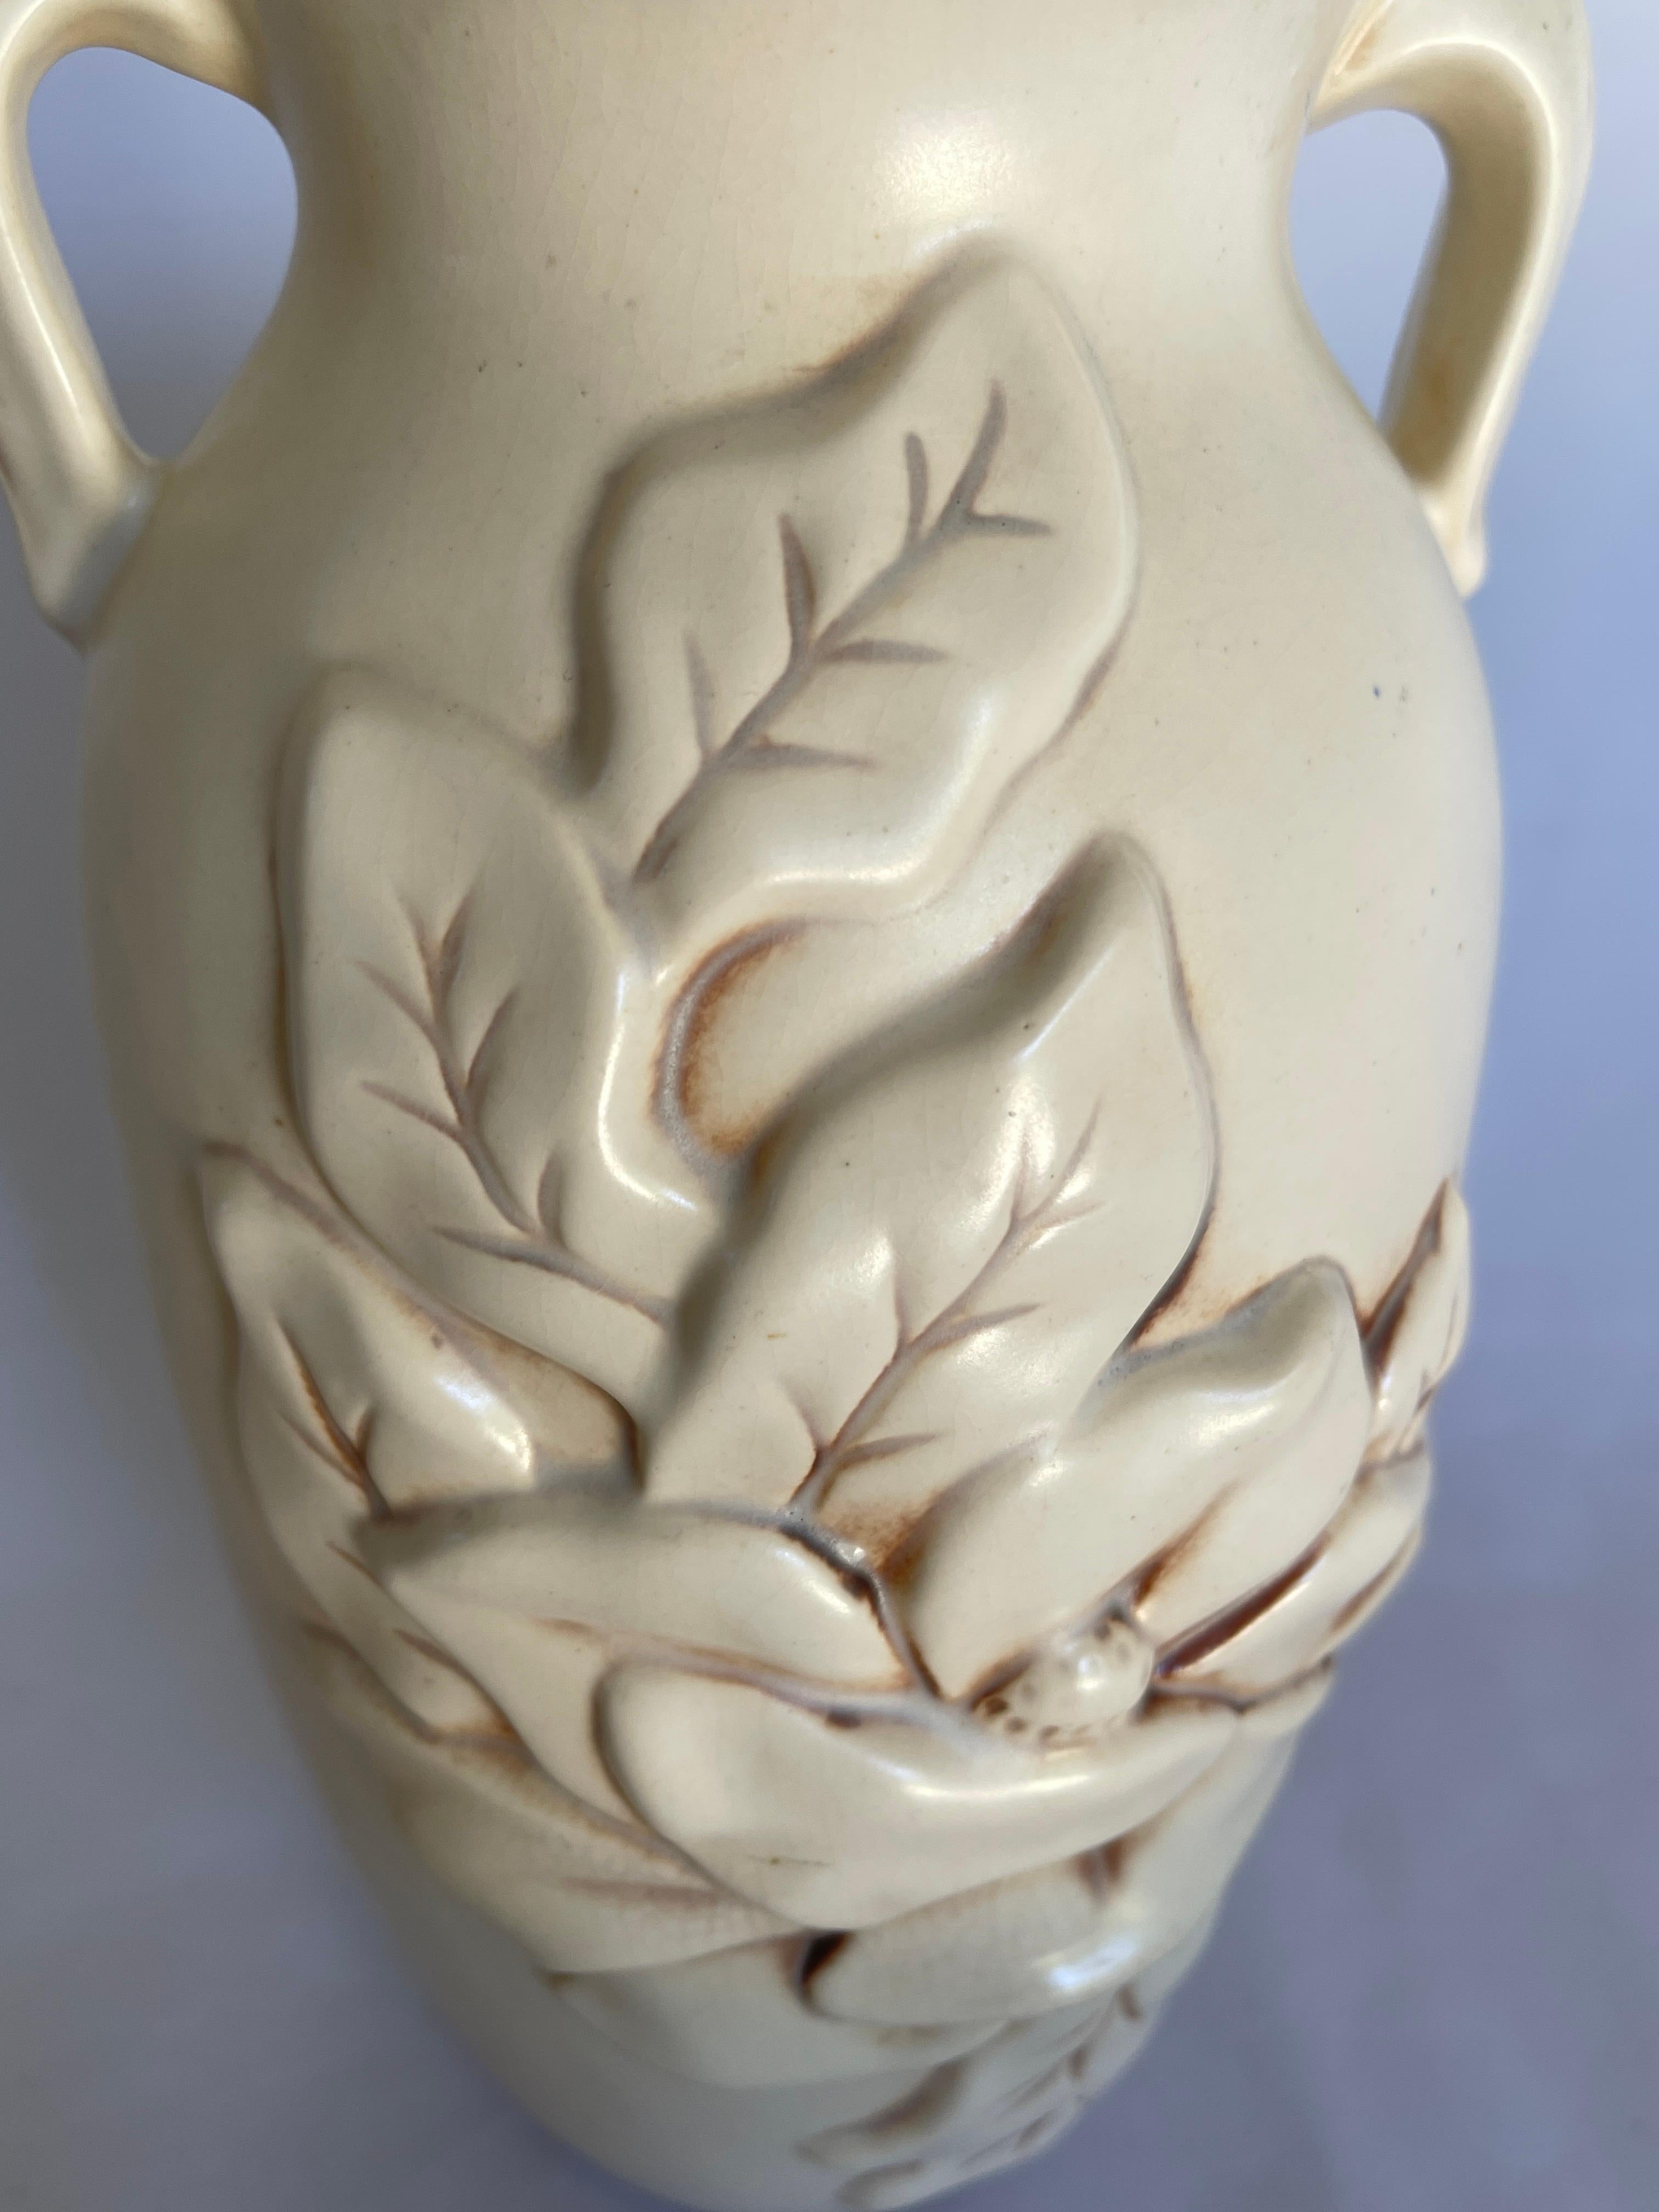 Art Deco ivory pottery vase with double floral design front and double handles with leaf form.  Signed and numbered on bottom,  Red Wing  USA .